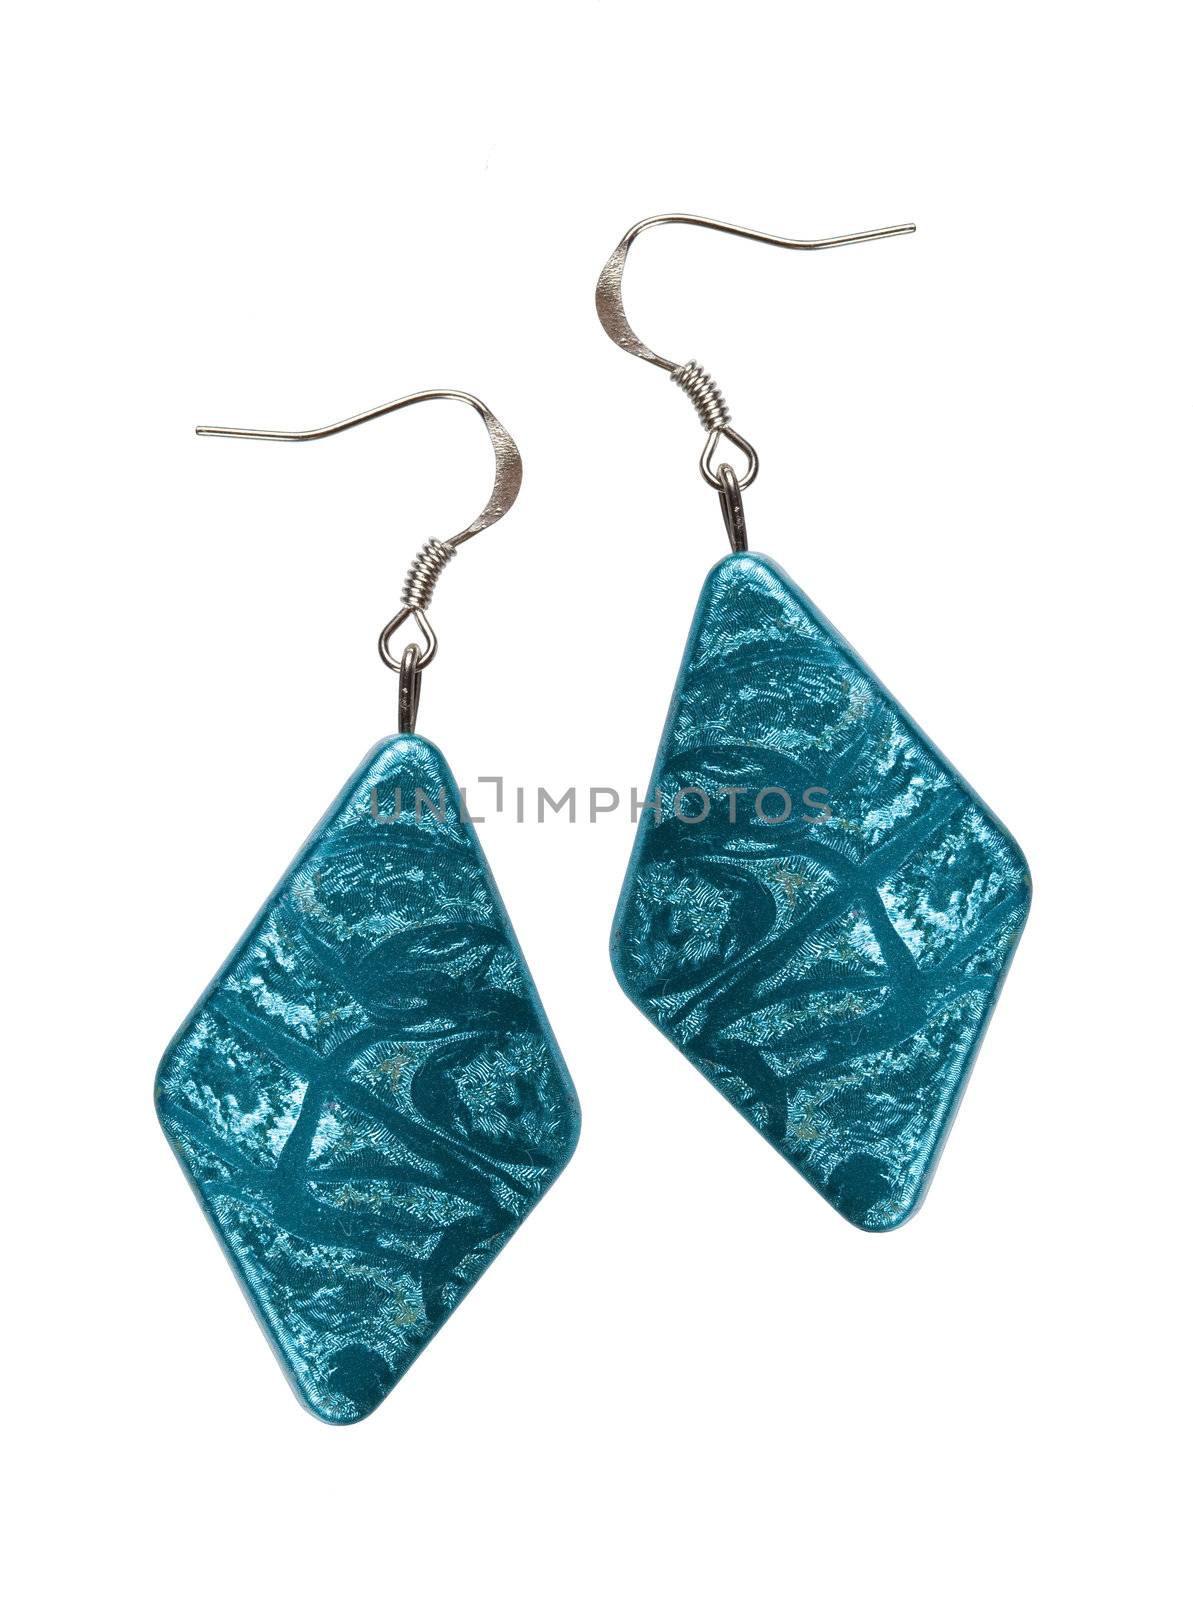 Earrings in silver diamond-shaped blue on a white background. Collage.